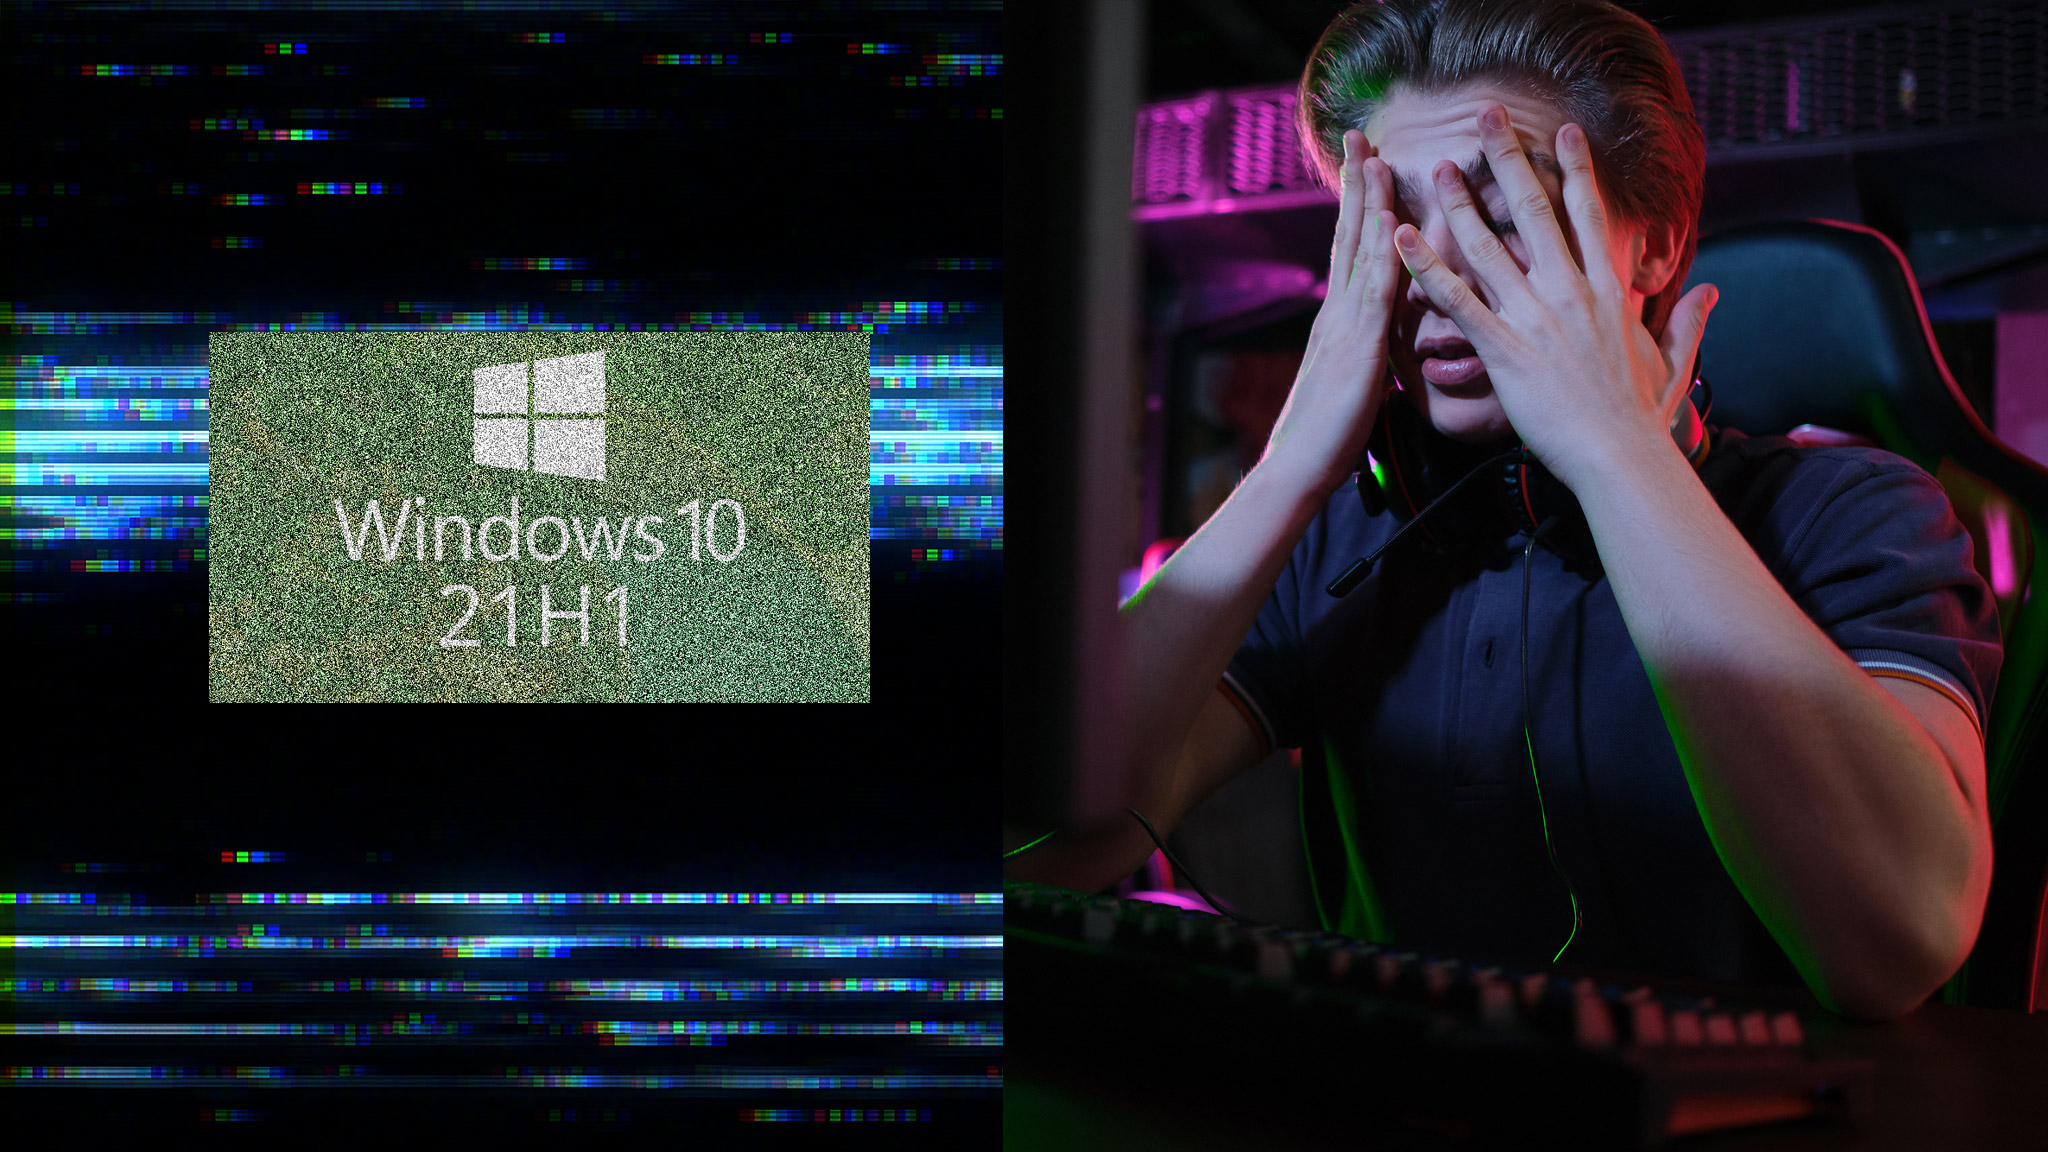 Windows 10: Update causes problems in games